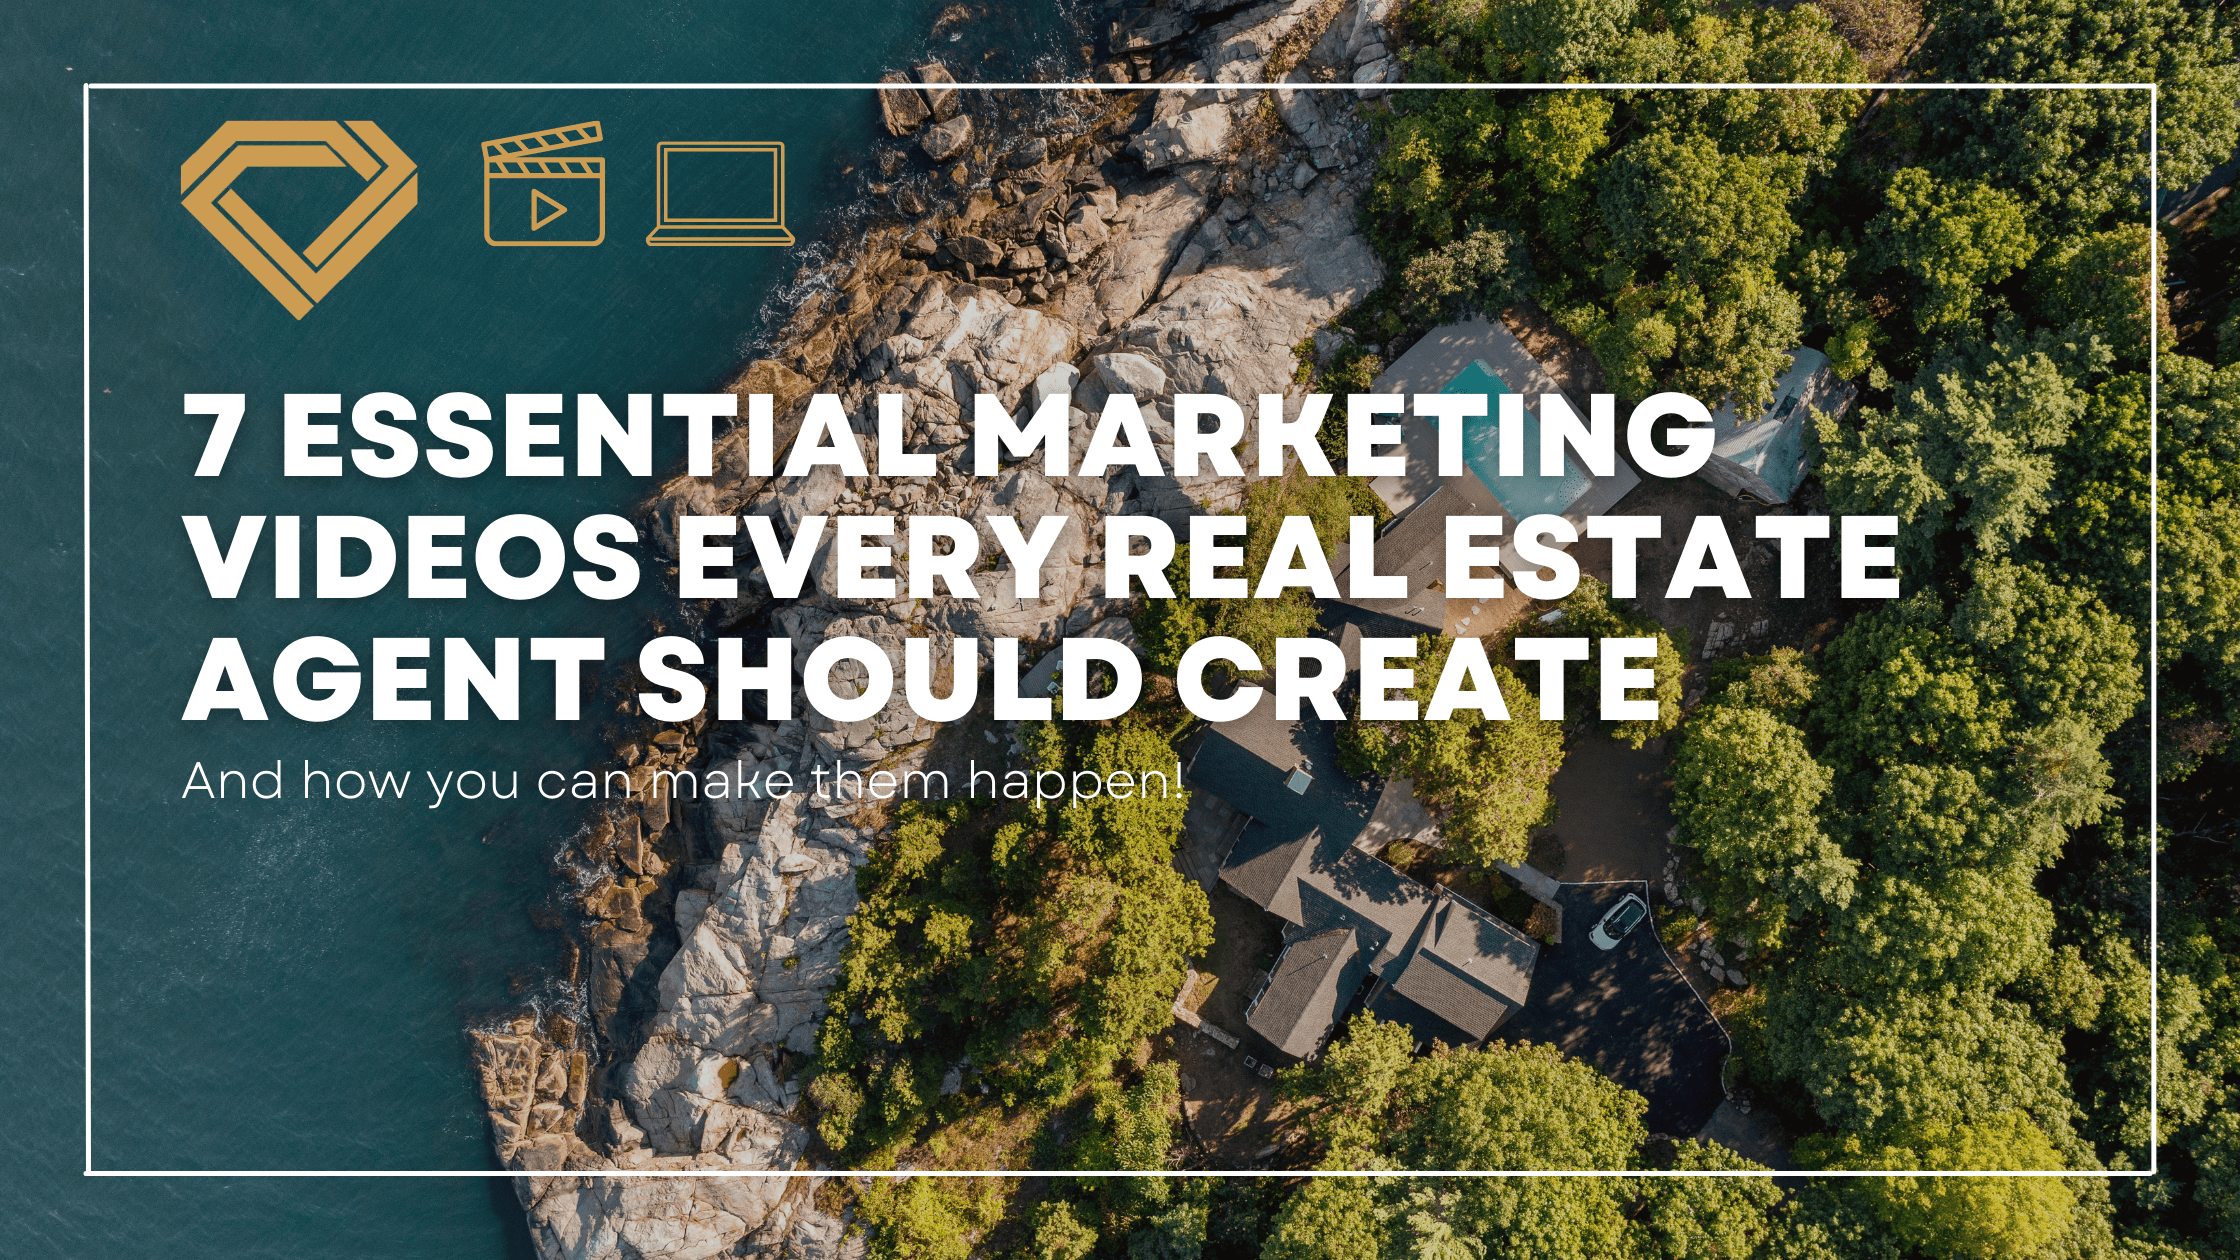 7 essential marketing videos for real estate agents